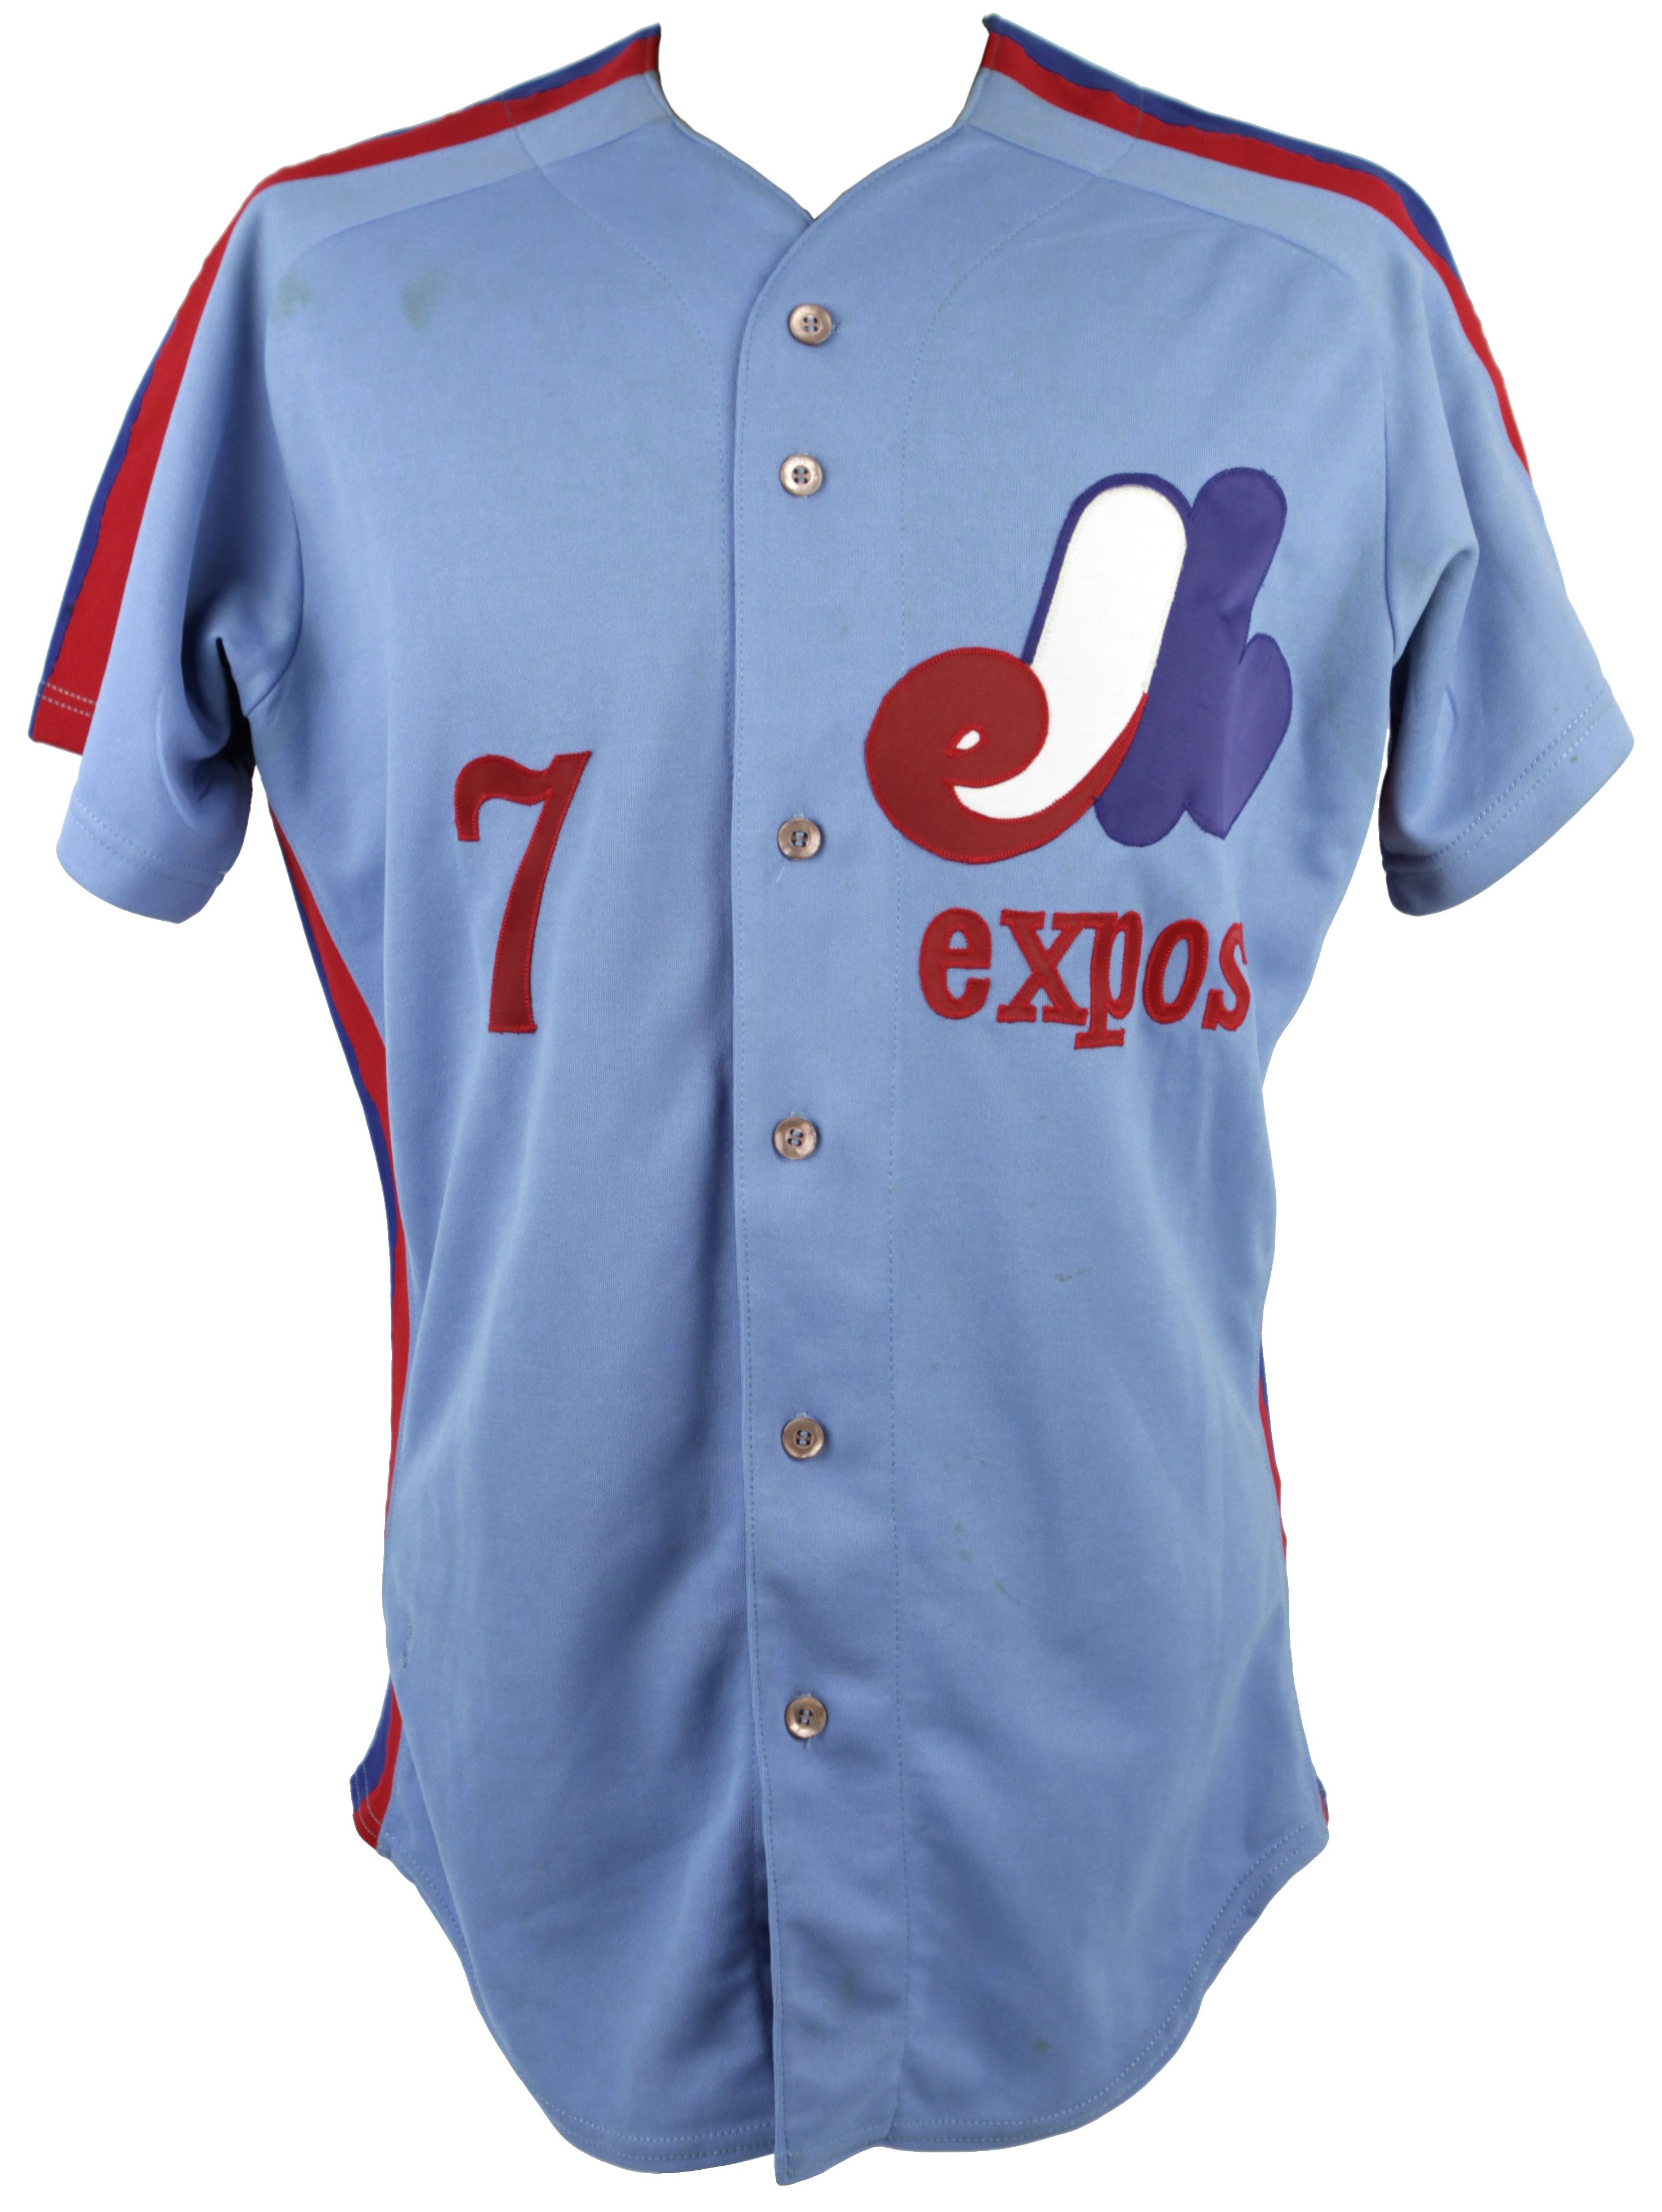 2003-04 Montreal Expos #85 Game Issued Blue Jersey BP ST XL 801